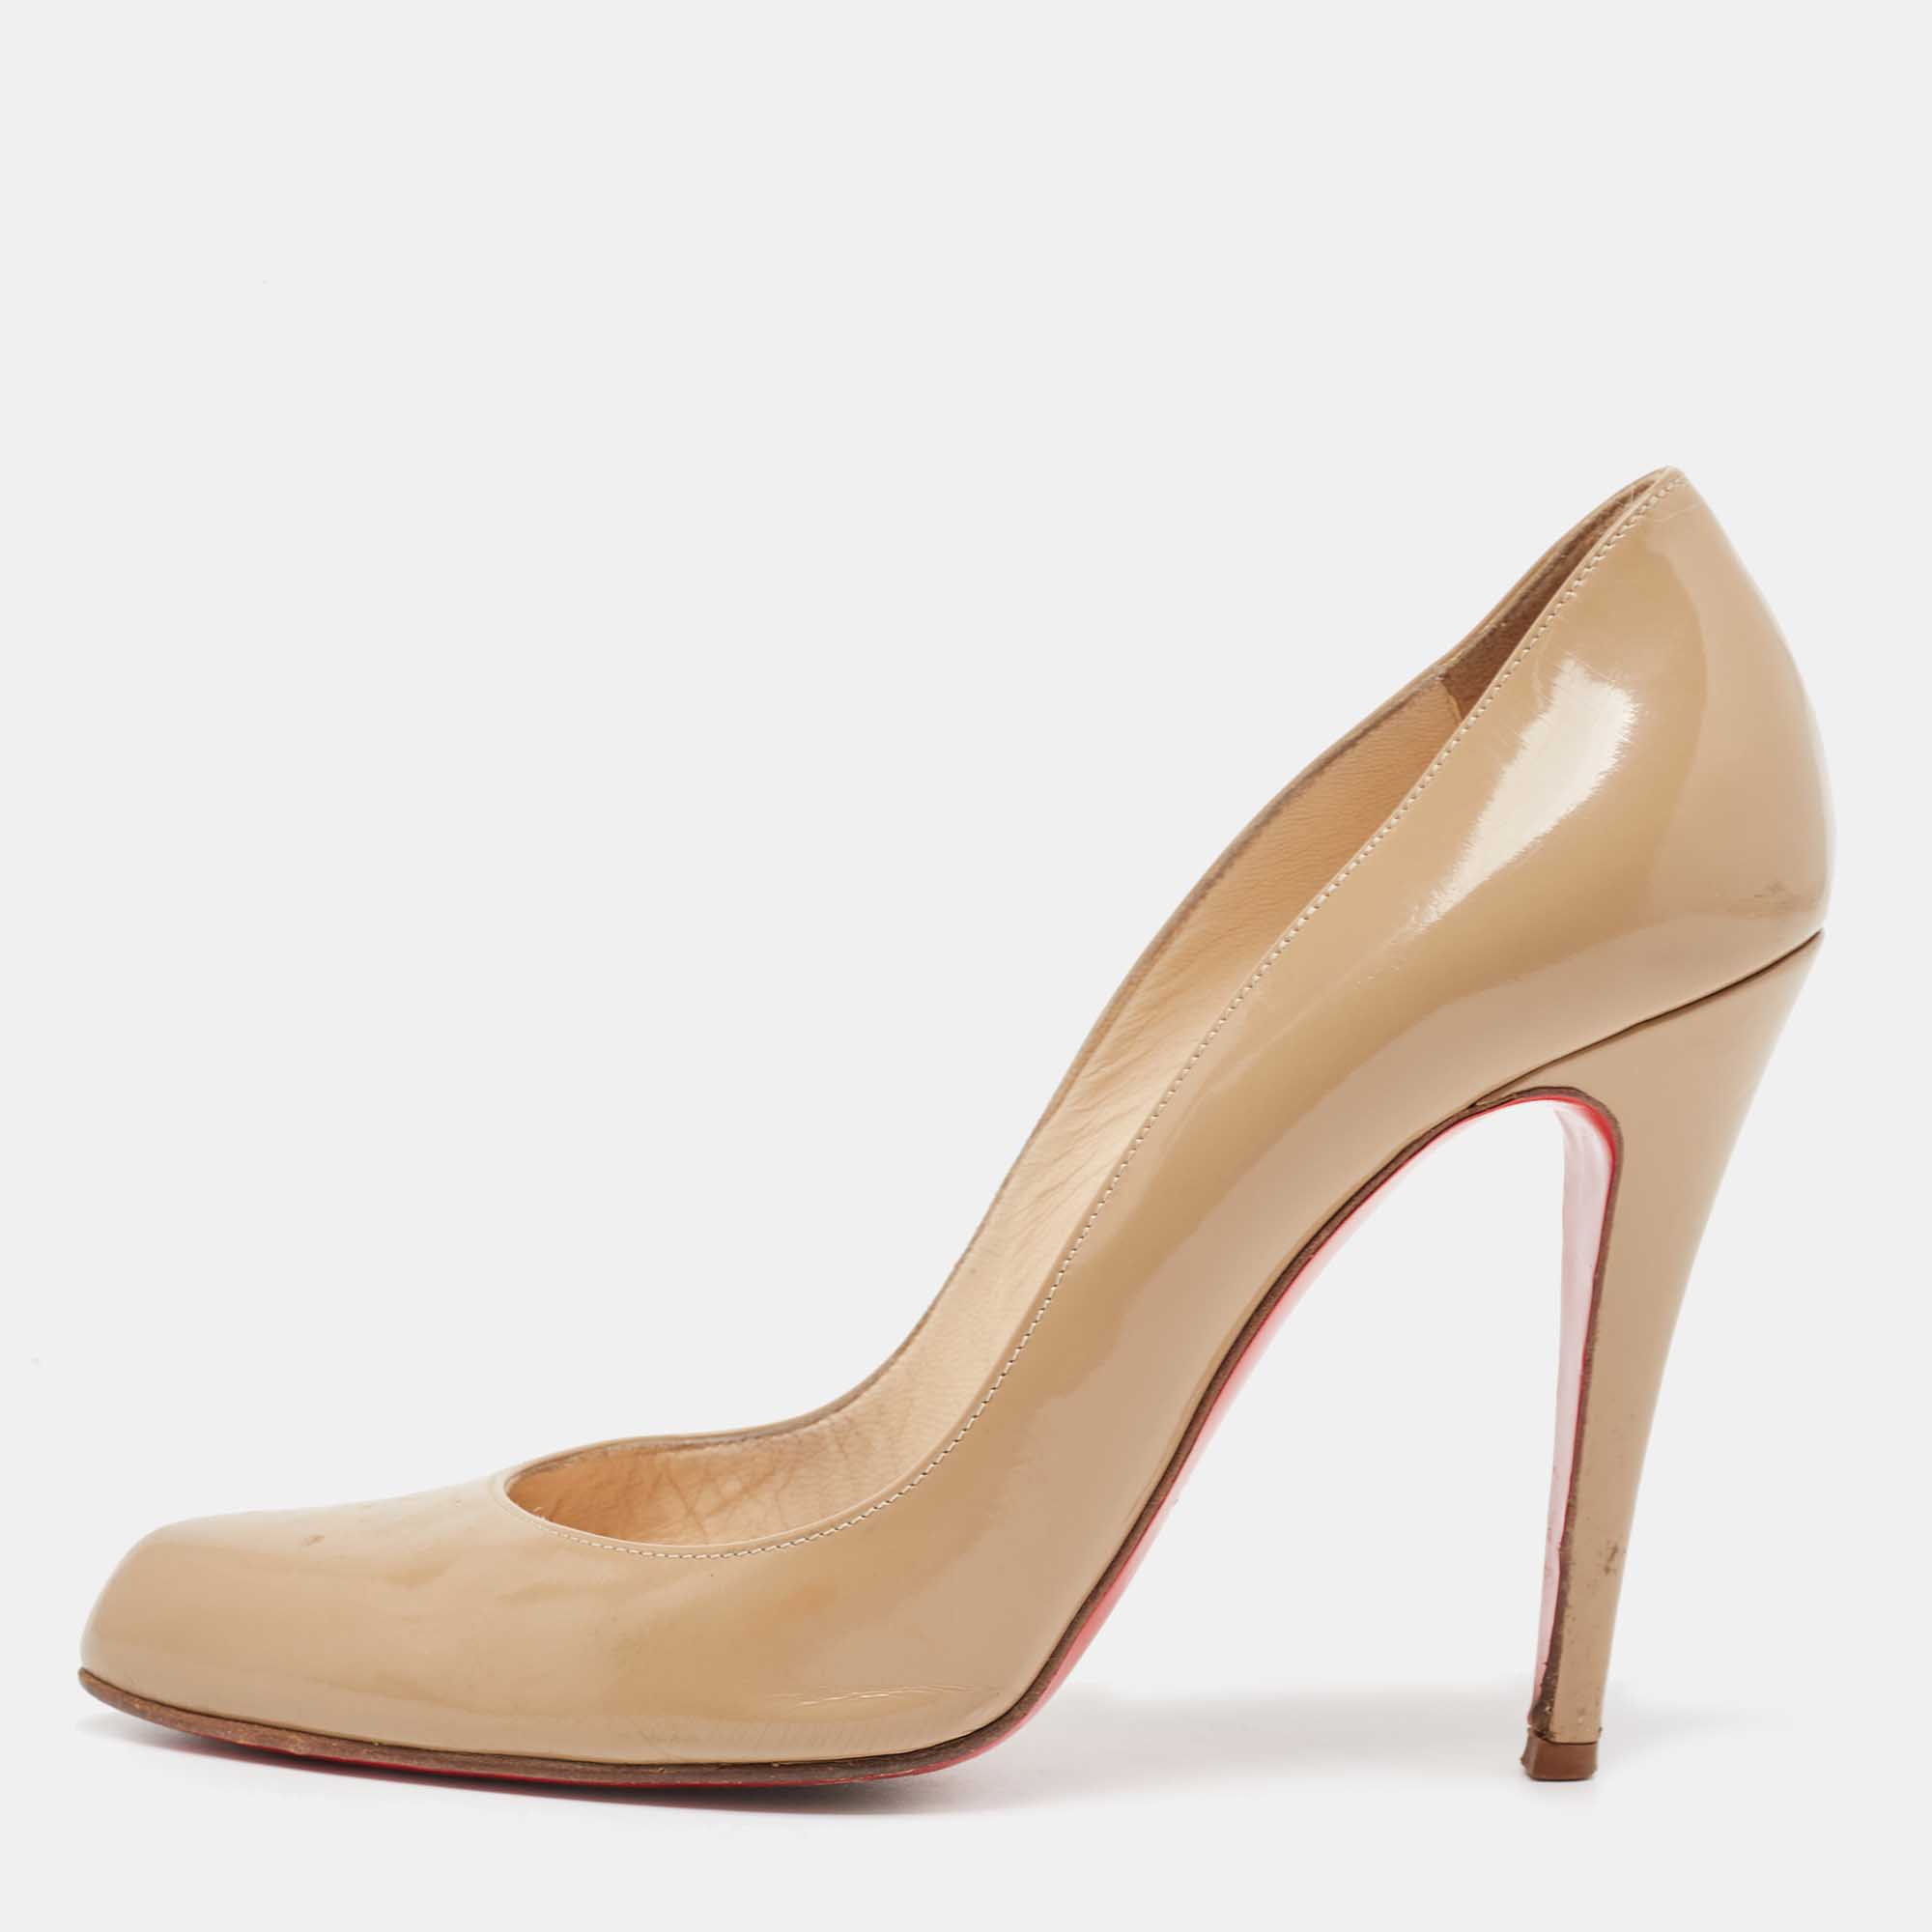 Pre-owned Christian Louboutin Beige Patent Simple Pumps Size 38.5